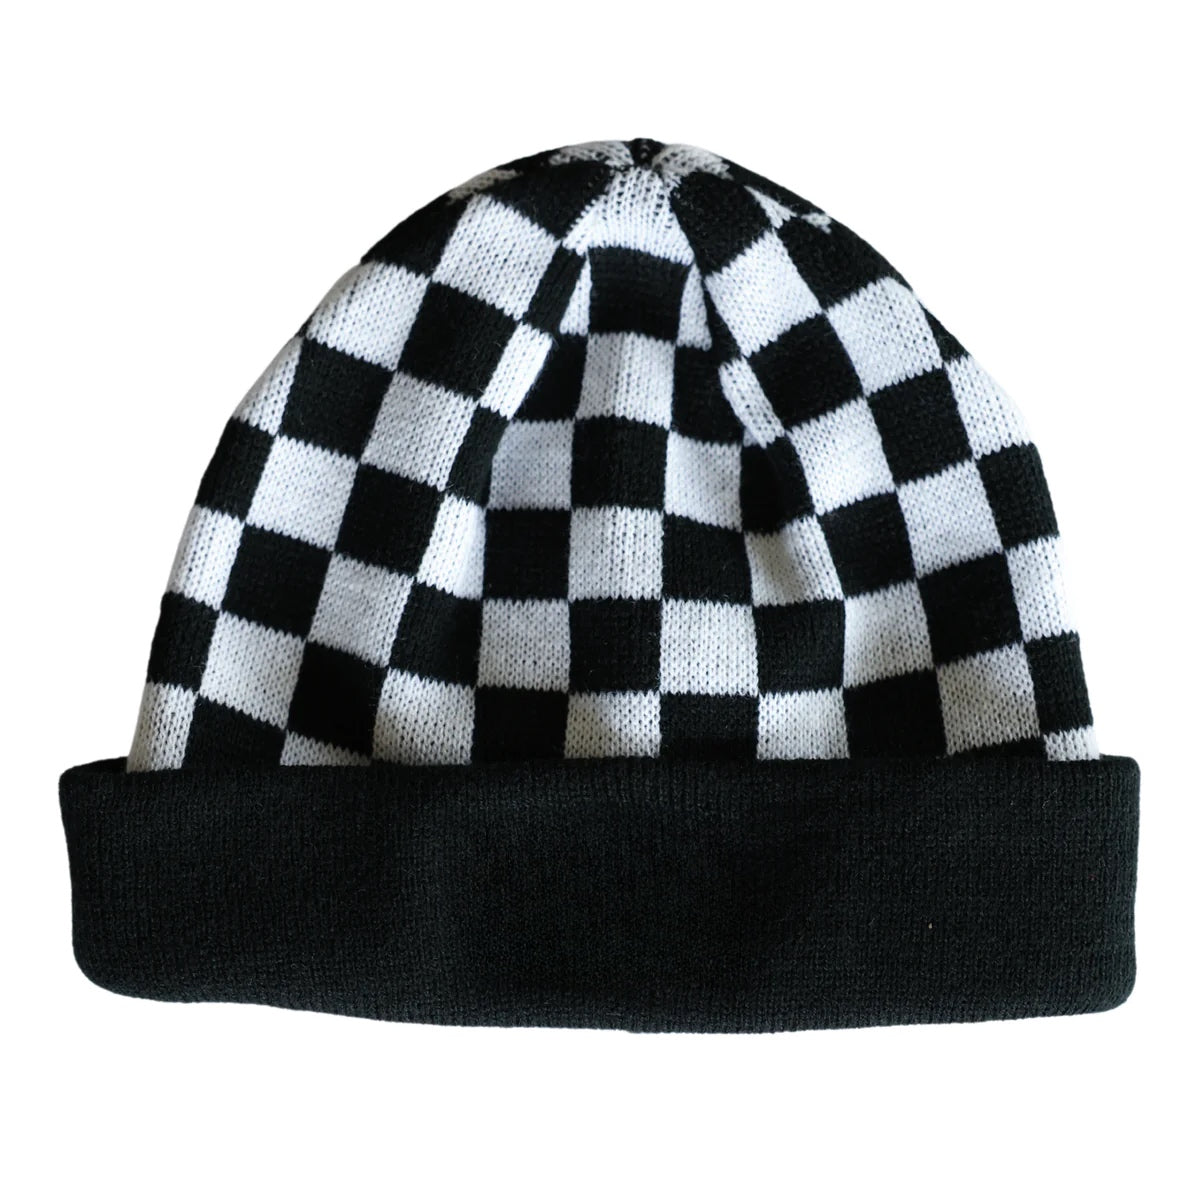 UNBRANDED CHECKERED BEANIES